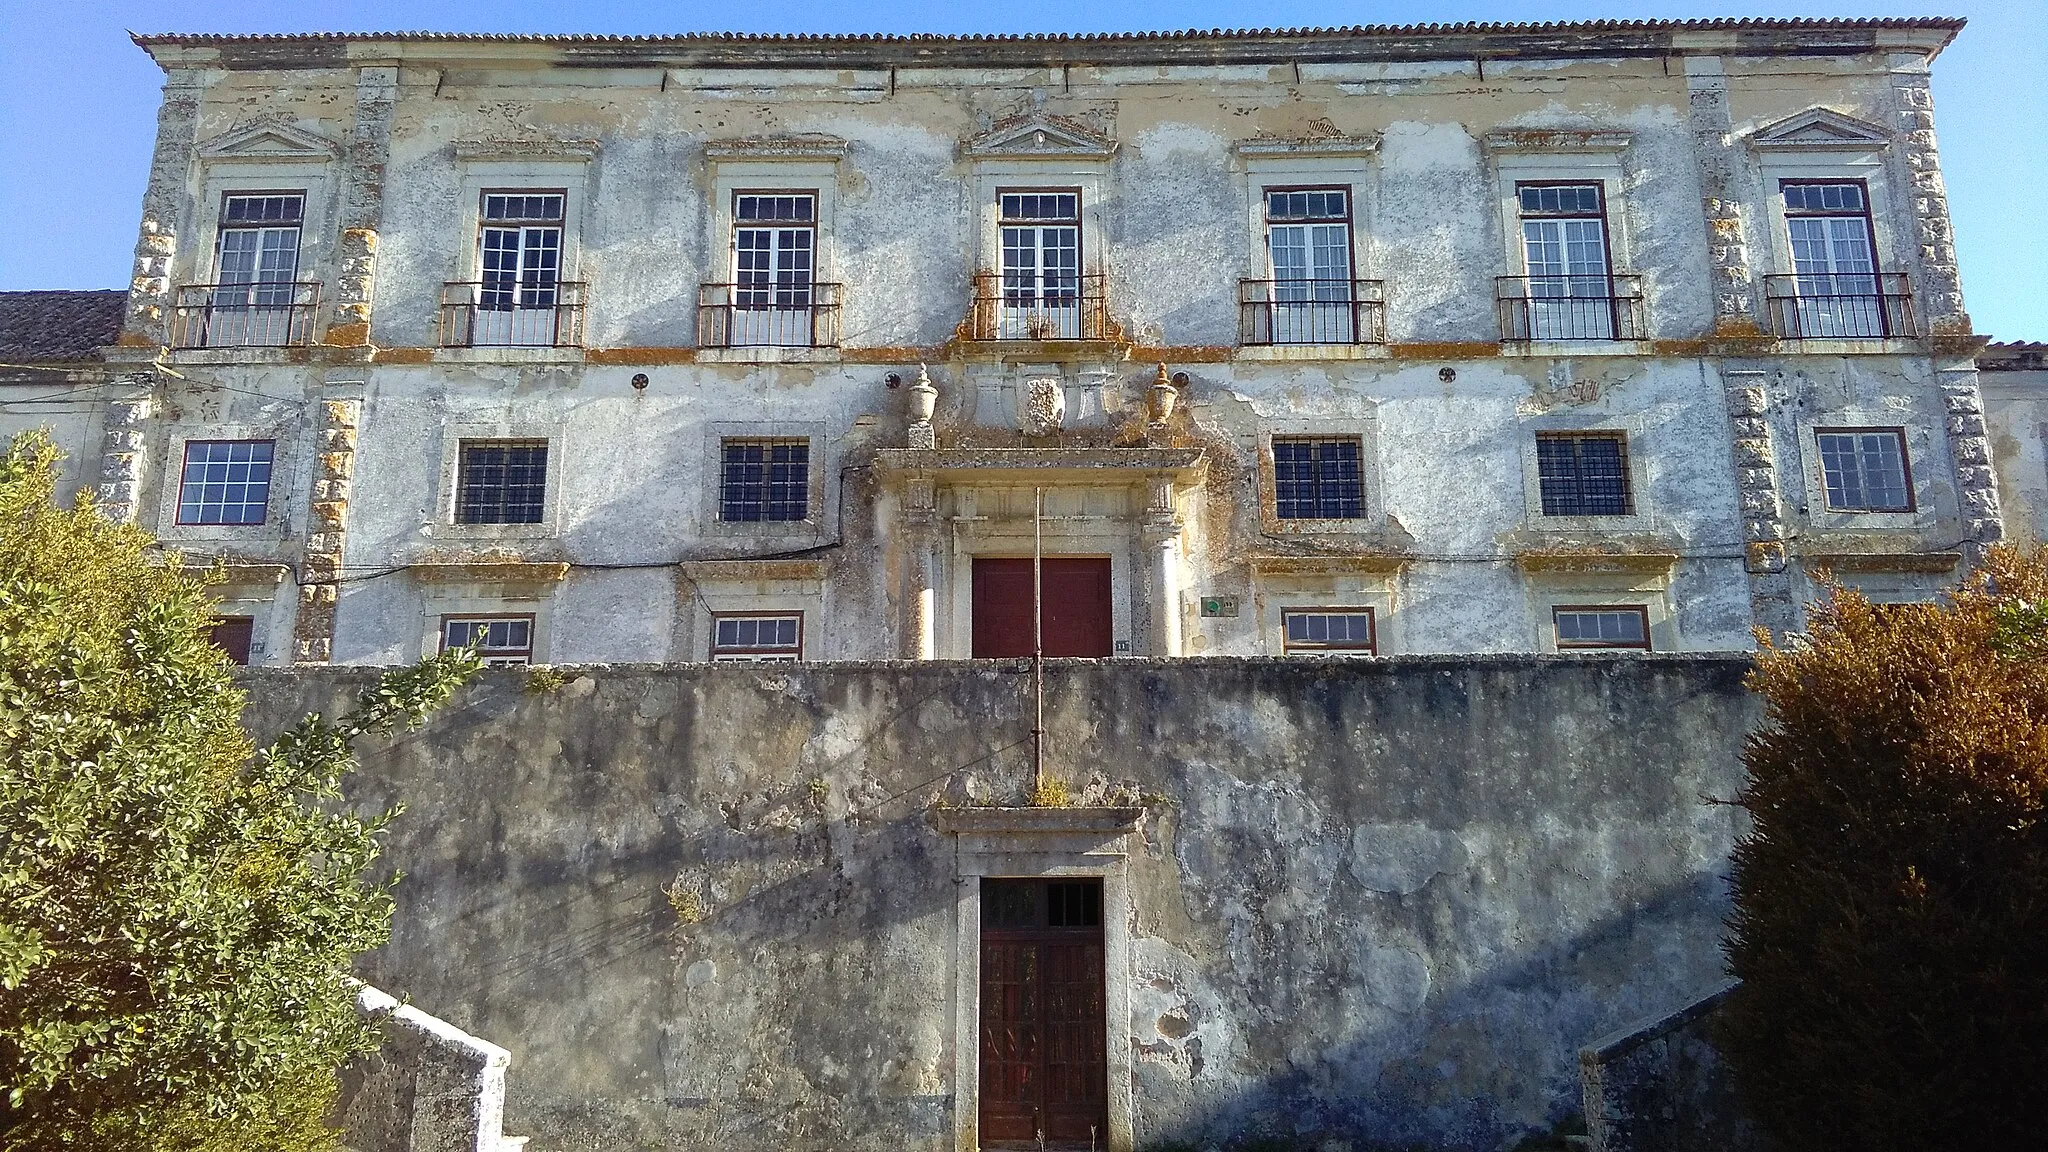 Photo showing: Facade of the Palace of the Dukes of Aveiro in Vila Nogueira de Azeitão, Portugal. The coat of arms of the family (above the main entrance) was destroyed following the "Távora affair" when the Palace was confiscated.